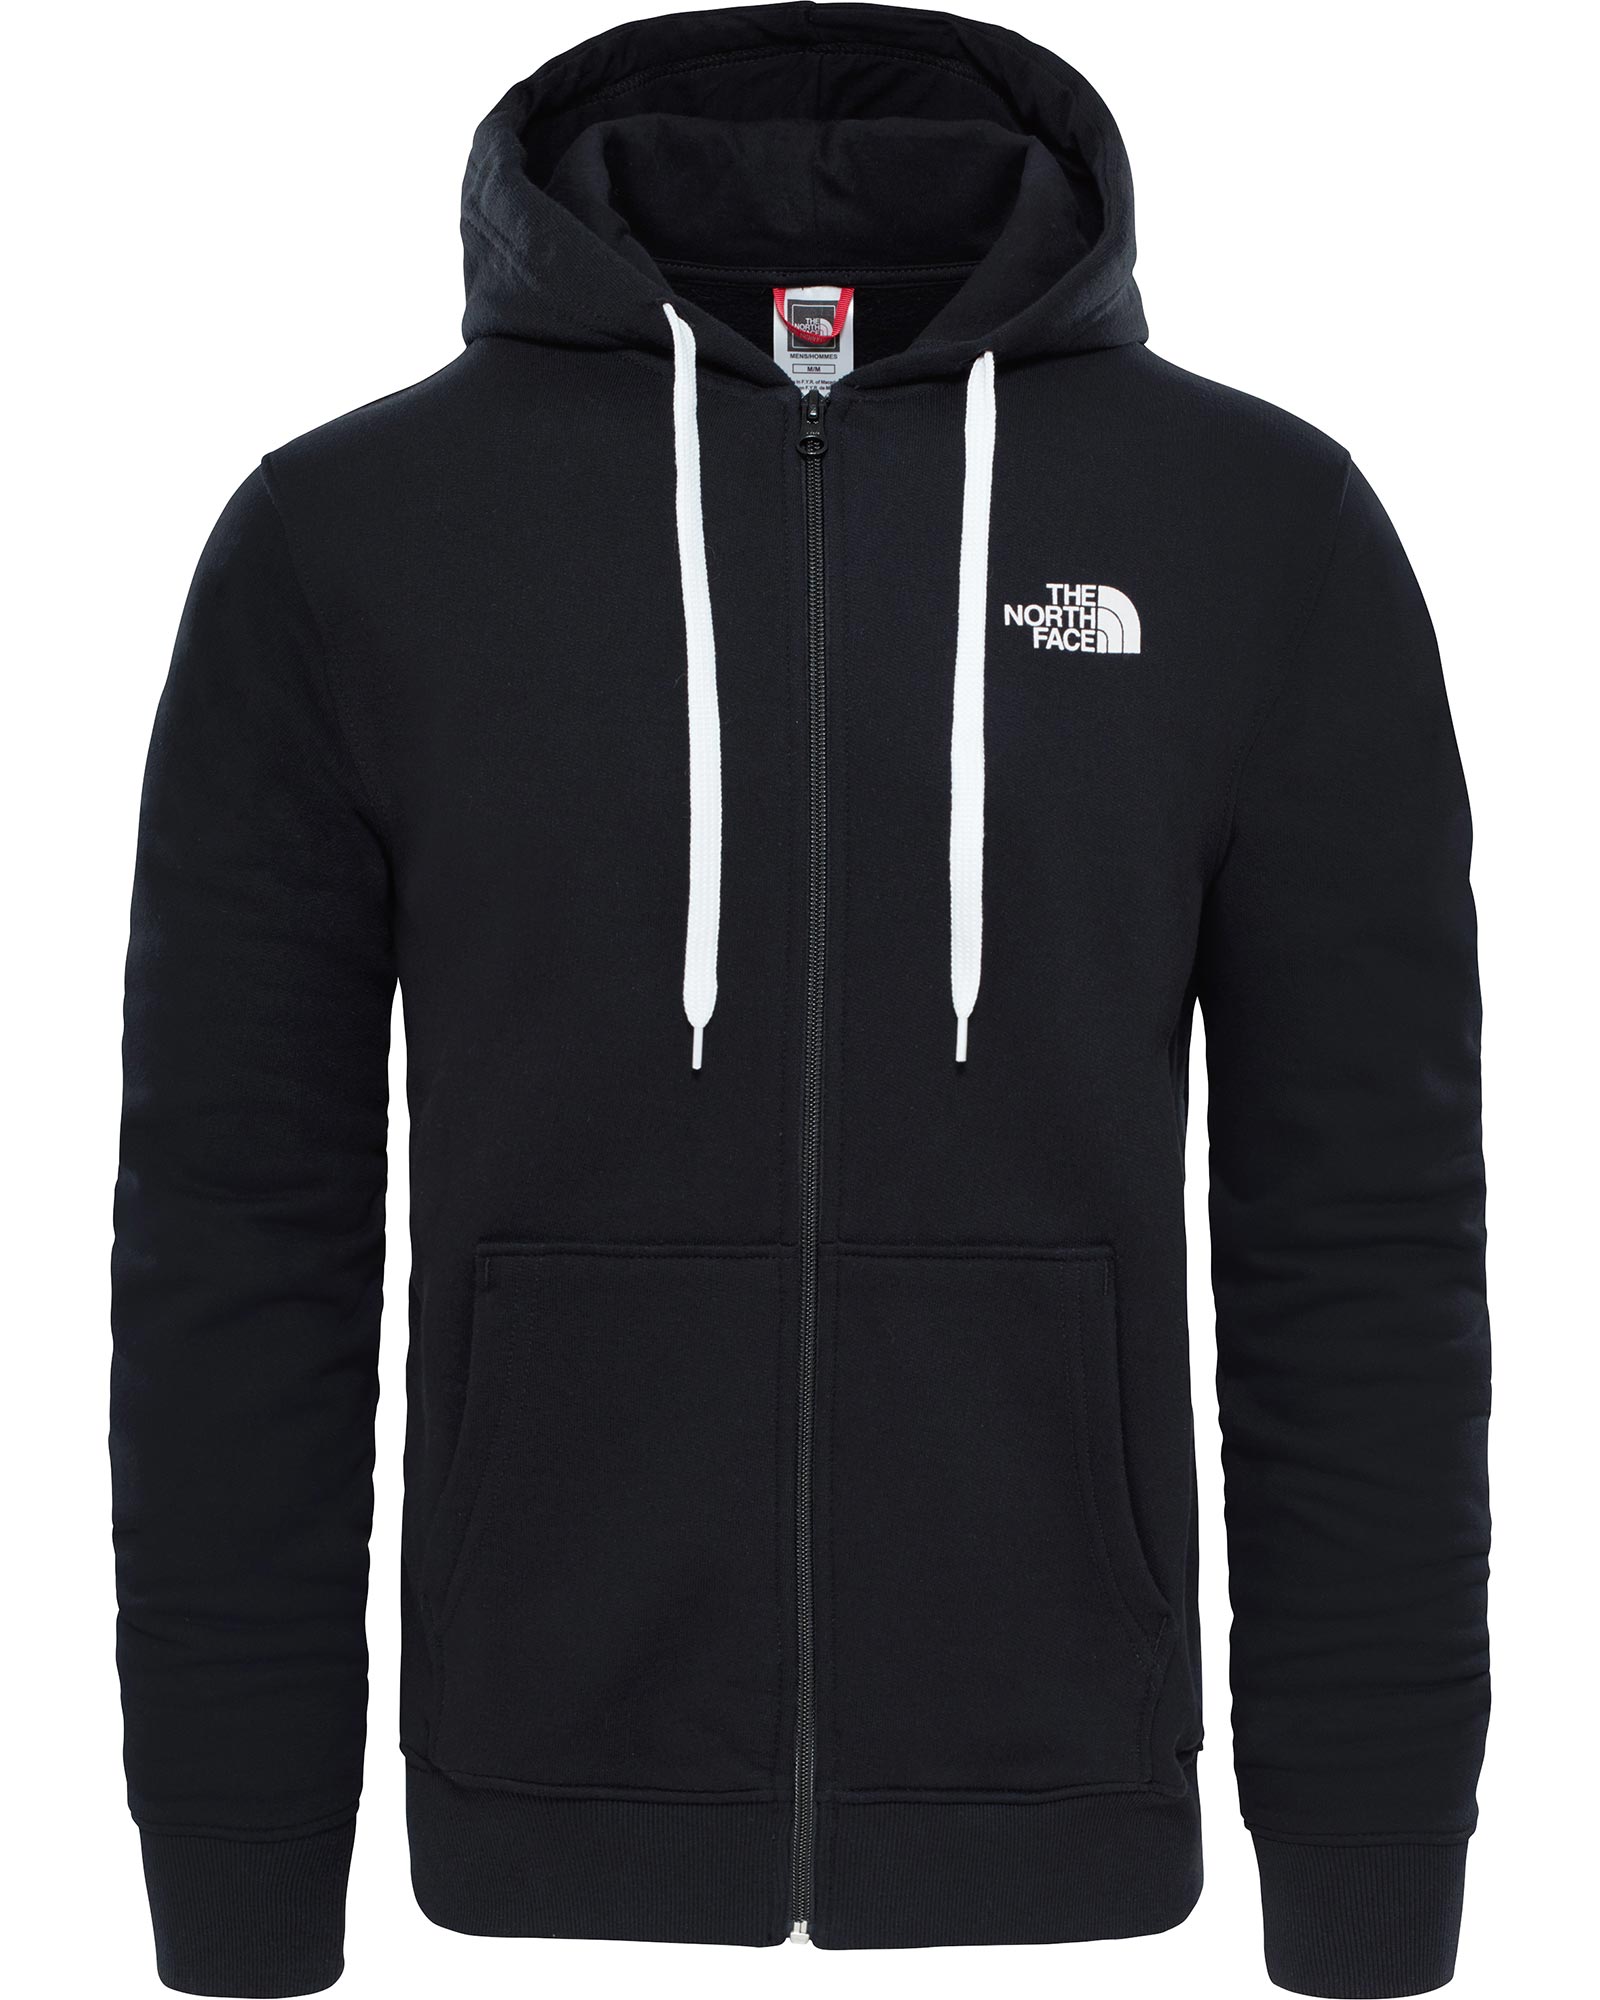 Product image of The North Face Open Gate Men's Full Zip Hoodie